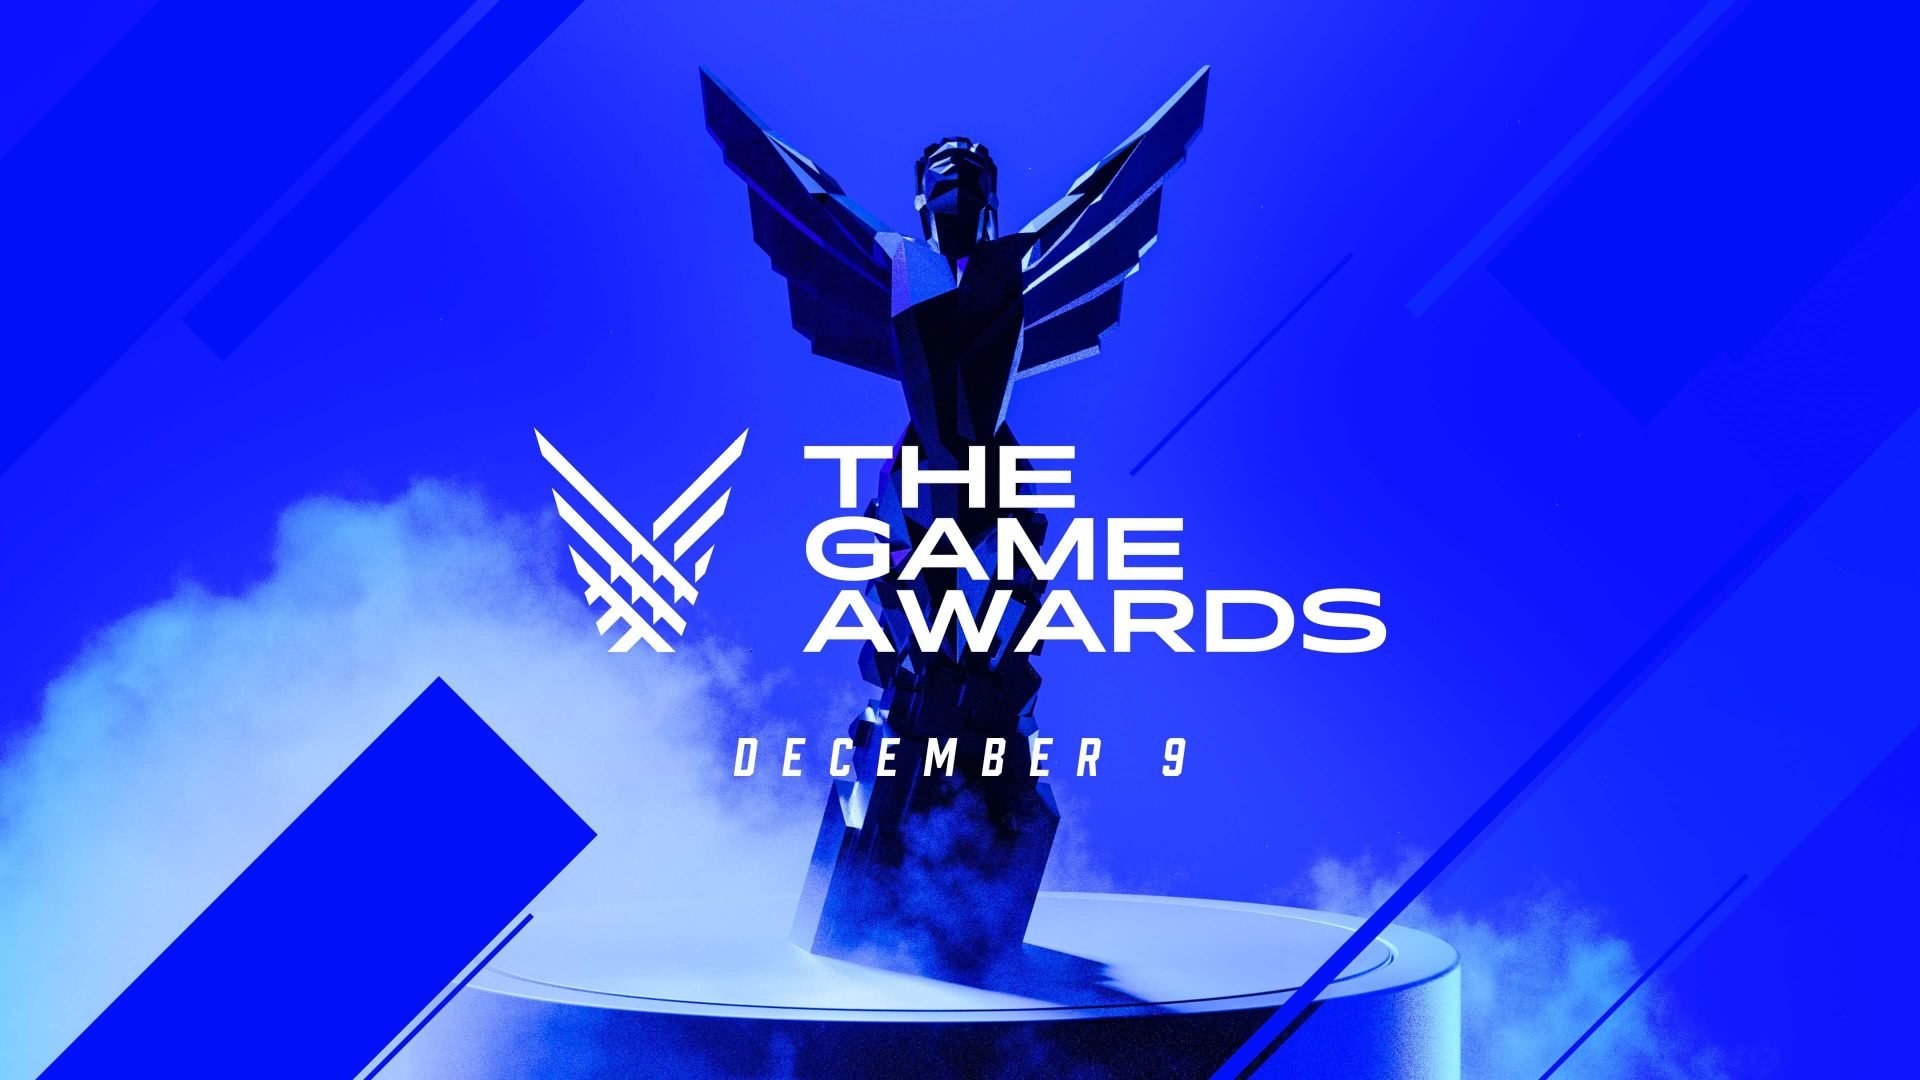 Deathloop Dominates the Nominations for The Game Awards 2021, Including for Game of the Year